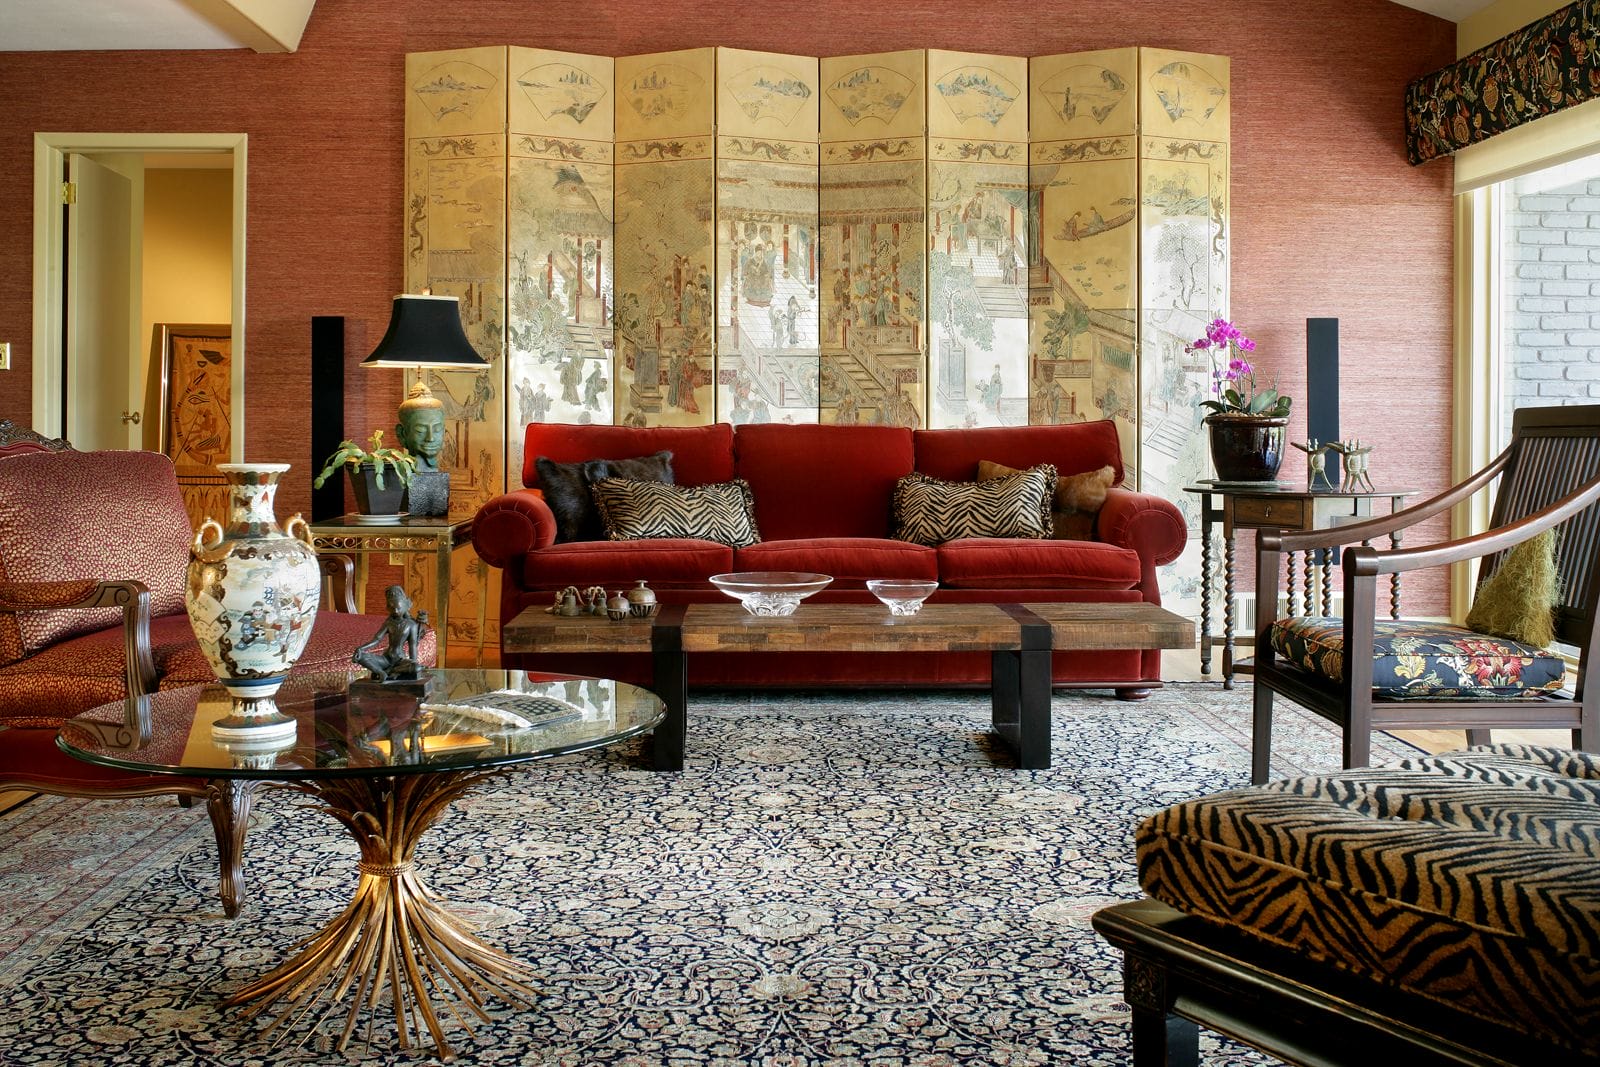 Eclectic Asian Style Living Room Decor ?strip=all&lossy=1